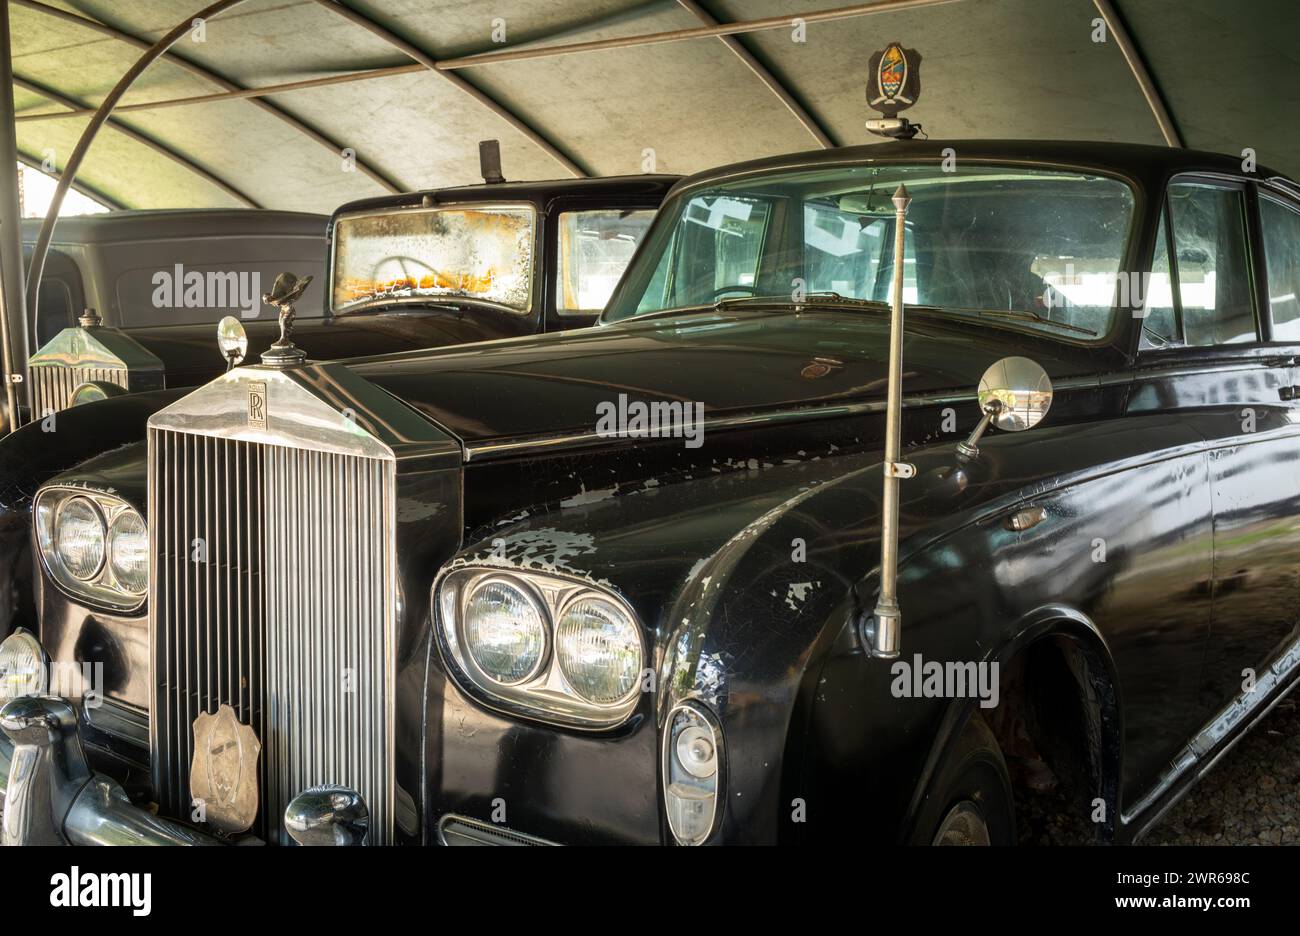 1965 Rolls-Royce Phantom V used by governement officials, National Museum, Dar es Salaam, Tanzania. Stock Photo